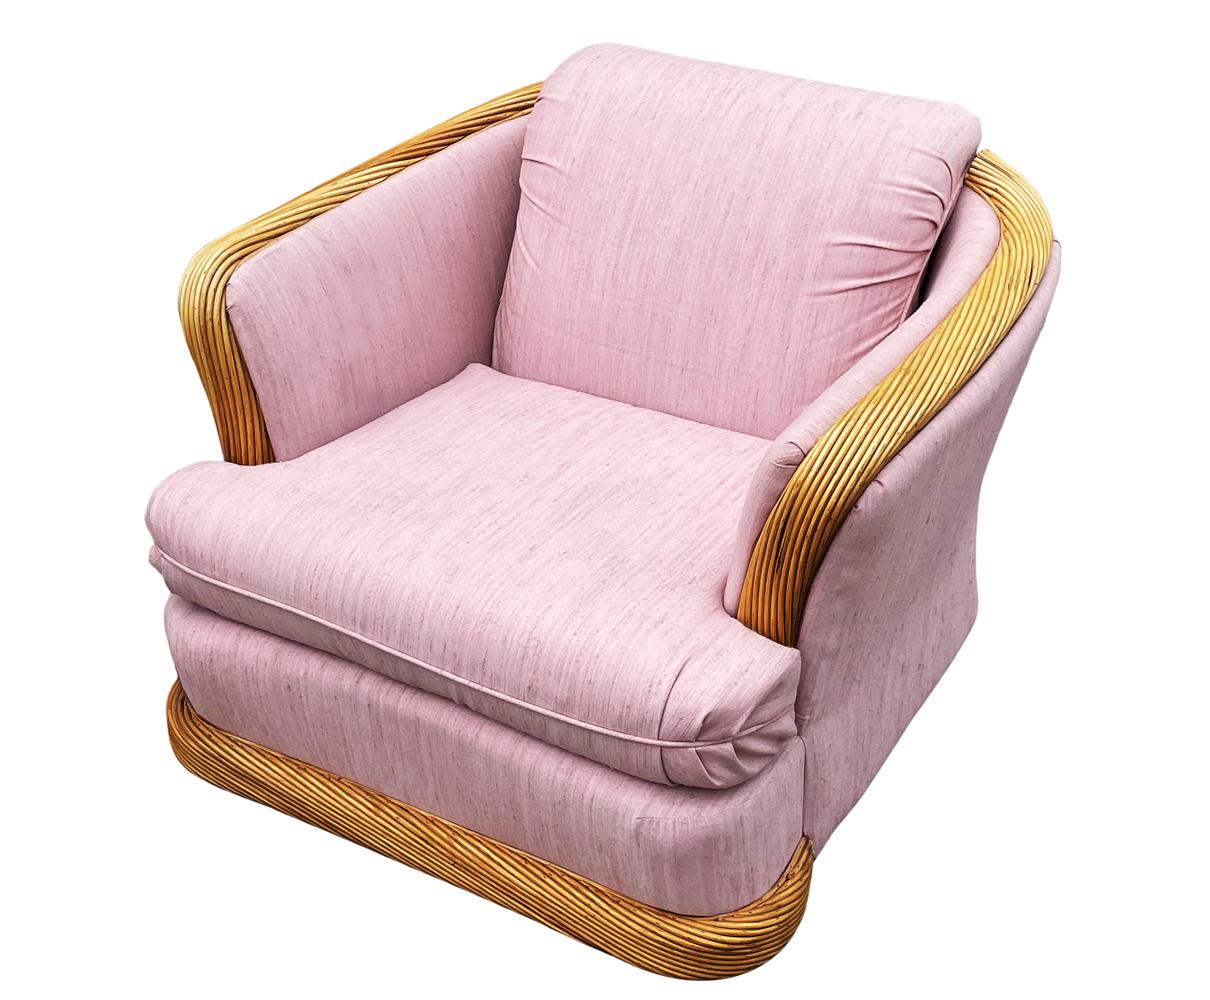 Hollywood Regency Midcentury Coastal Modern Rattan Club or Lounge Chair with Pink Fabric For Sale